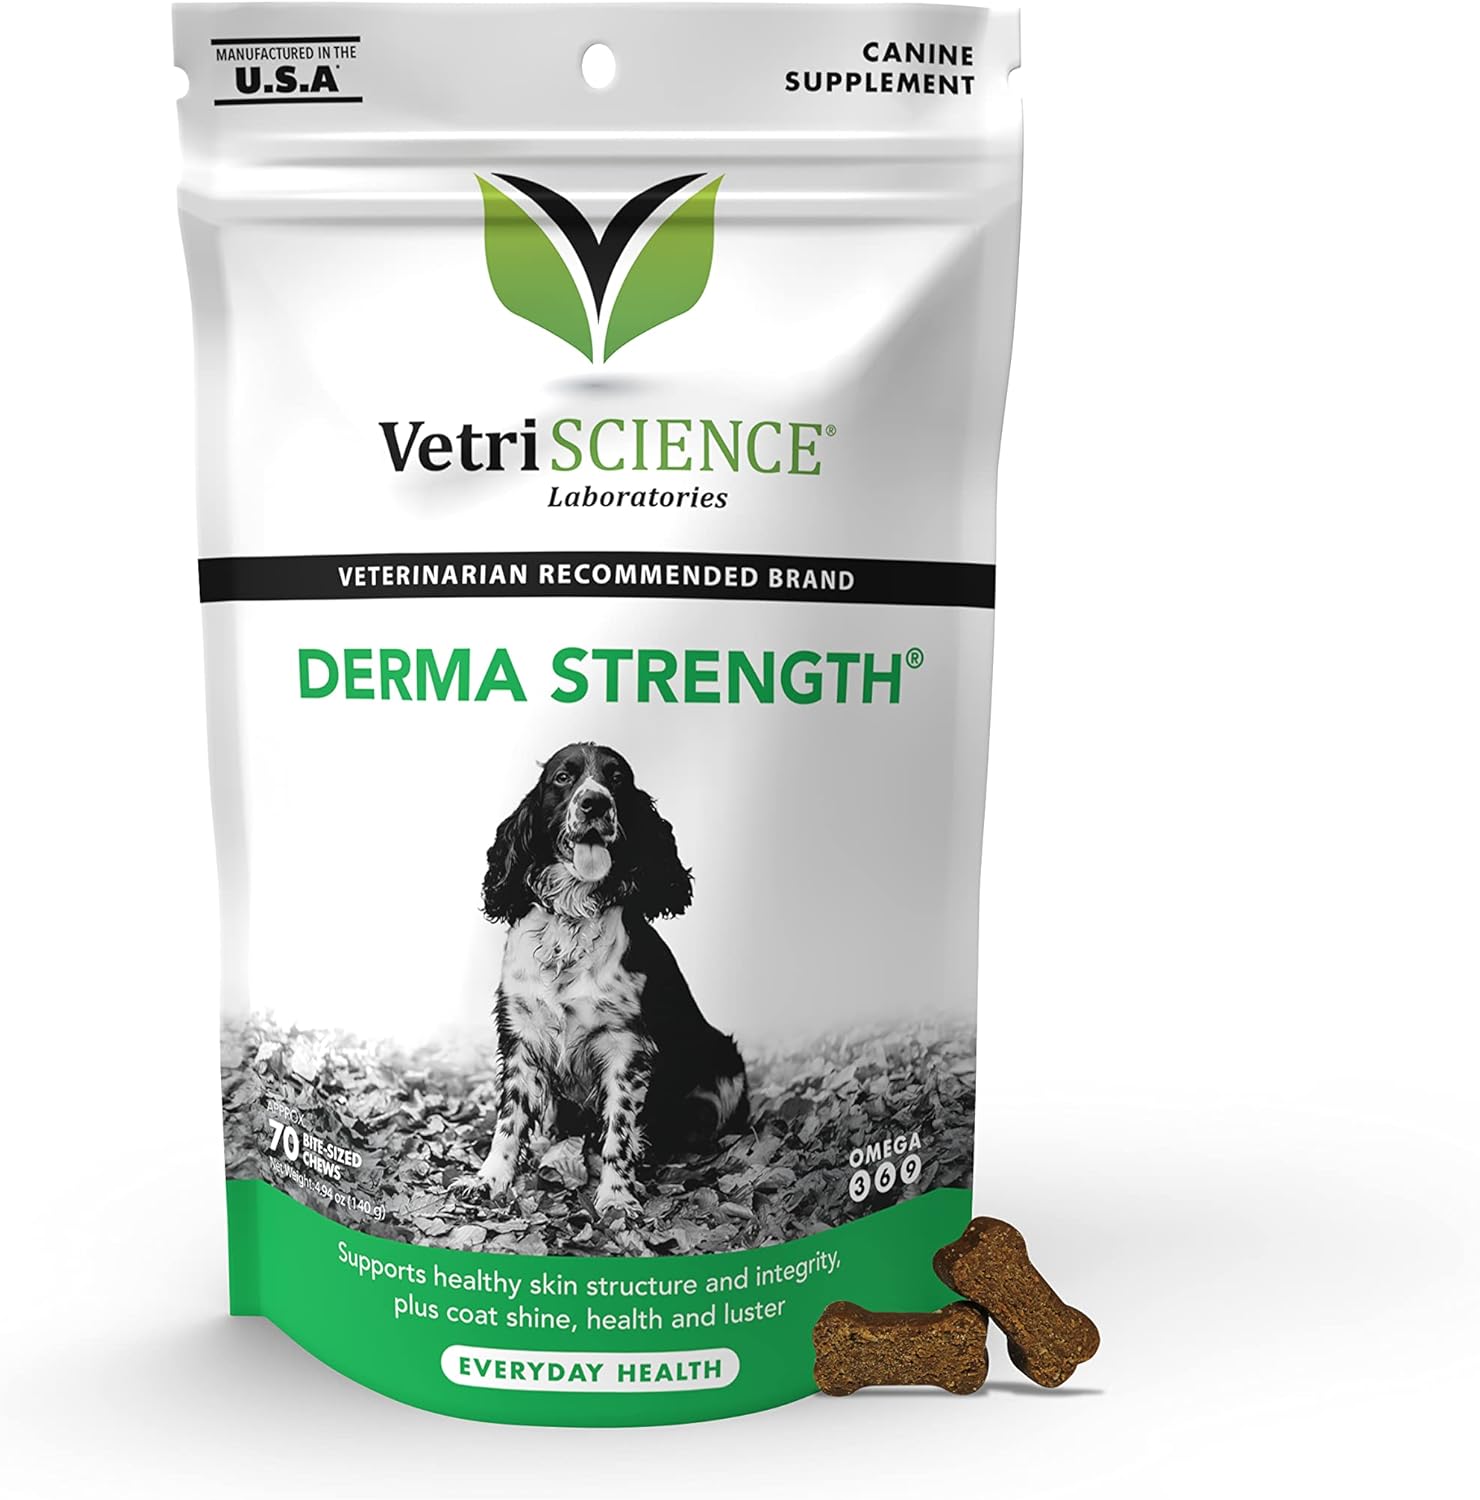 VetriScience Derma Strength Healthy Skin and Coat Chews with Omega 3, 6 and 9 for Dogs, 70 Chews - Can Reduce Shedding and Support Skin Health